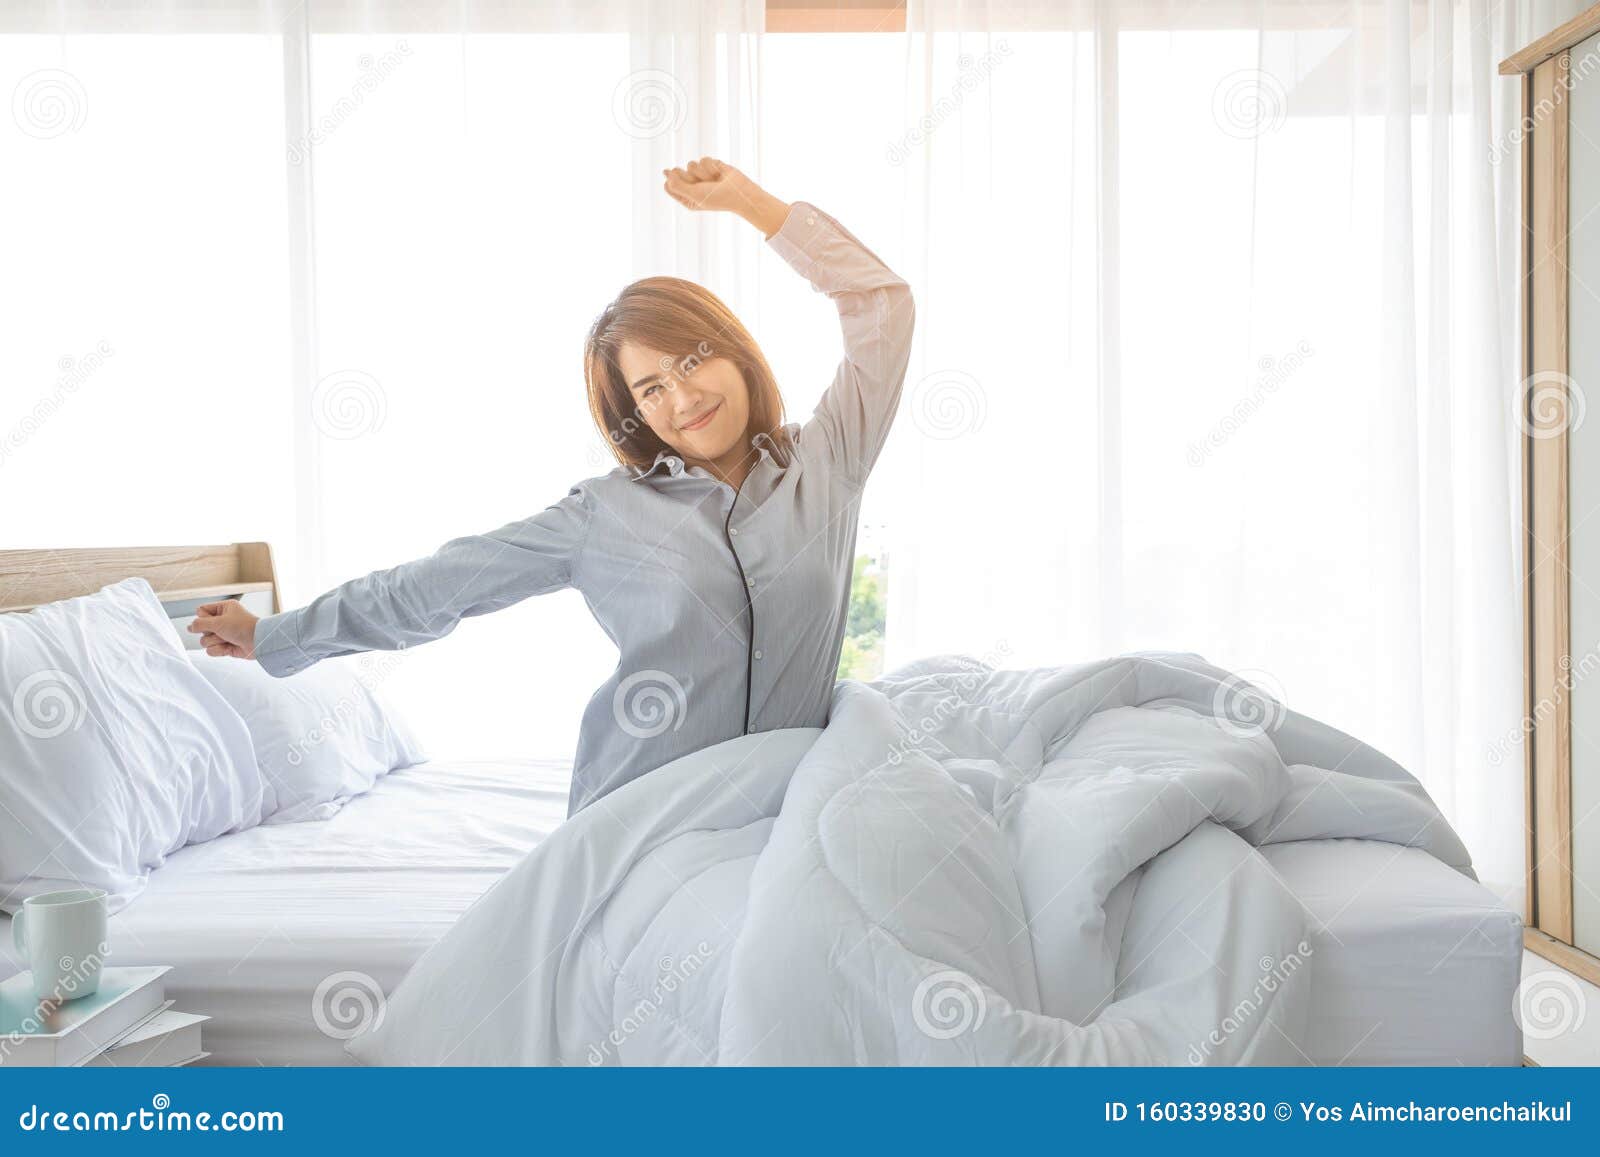 an asian woman aged about 20 wakes up in the morning in a bright bed in a bedroom or hotel after a restful night`s sleep